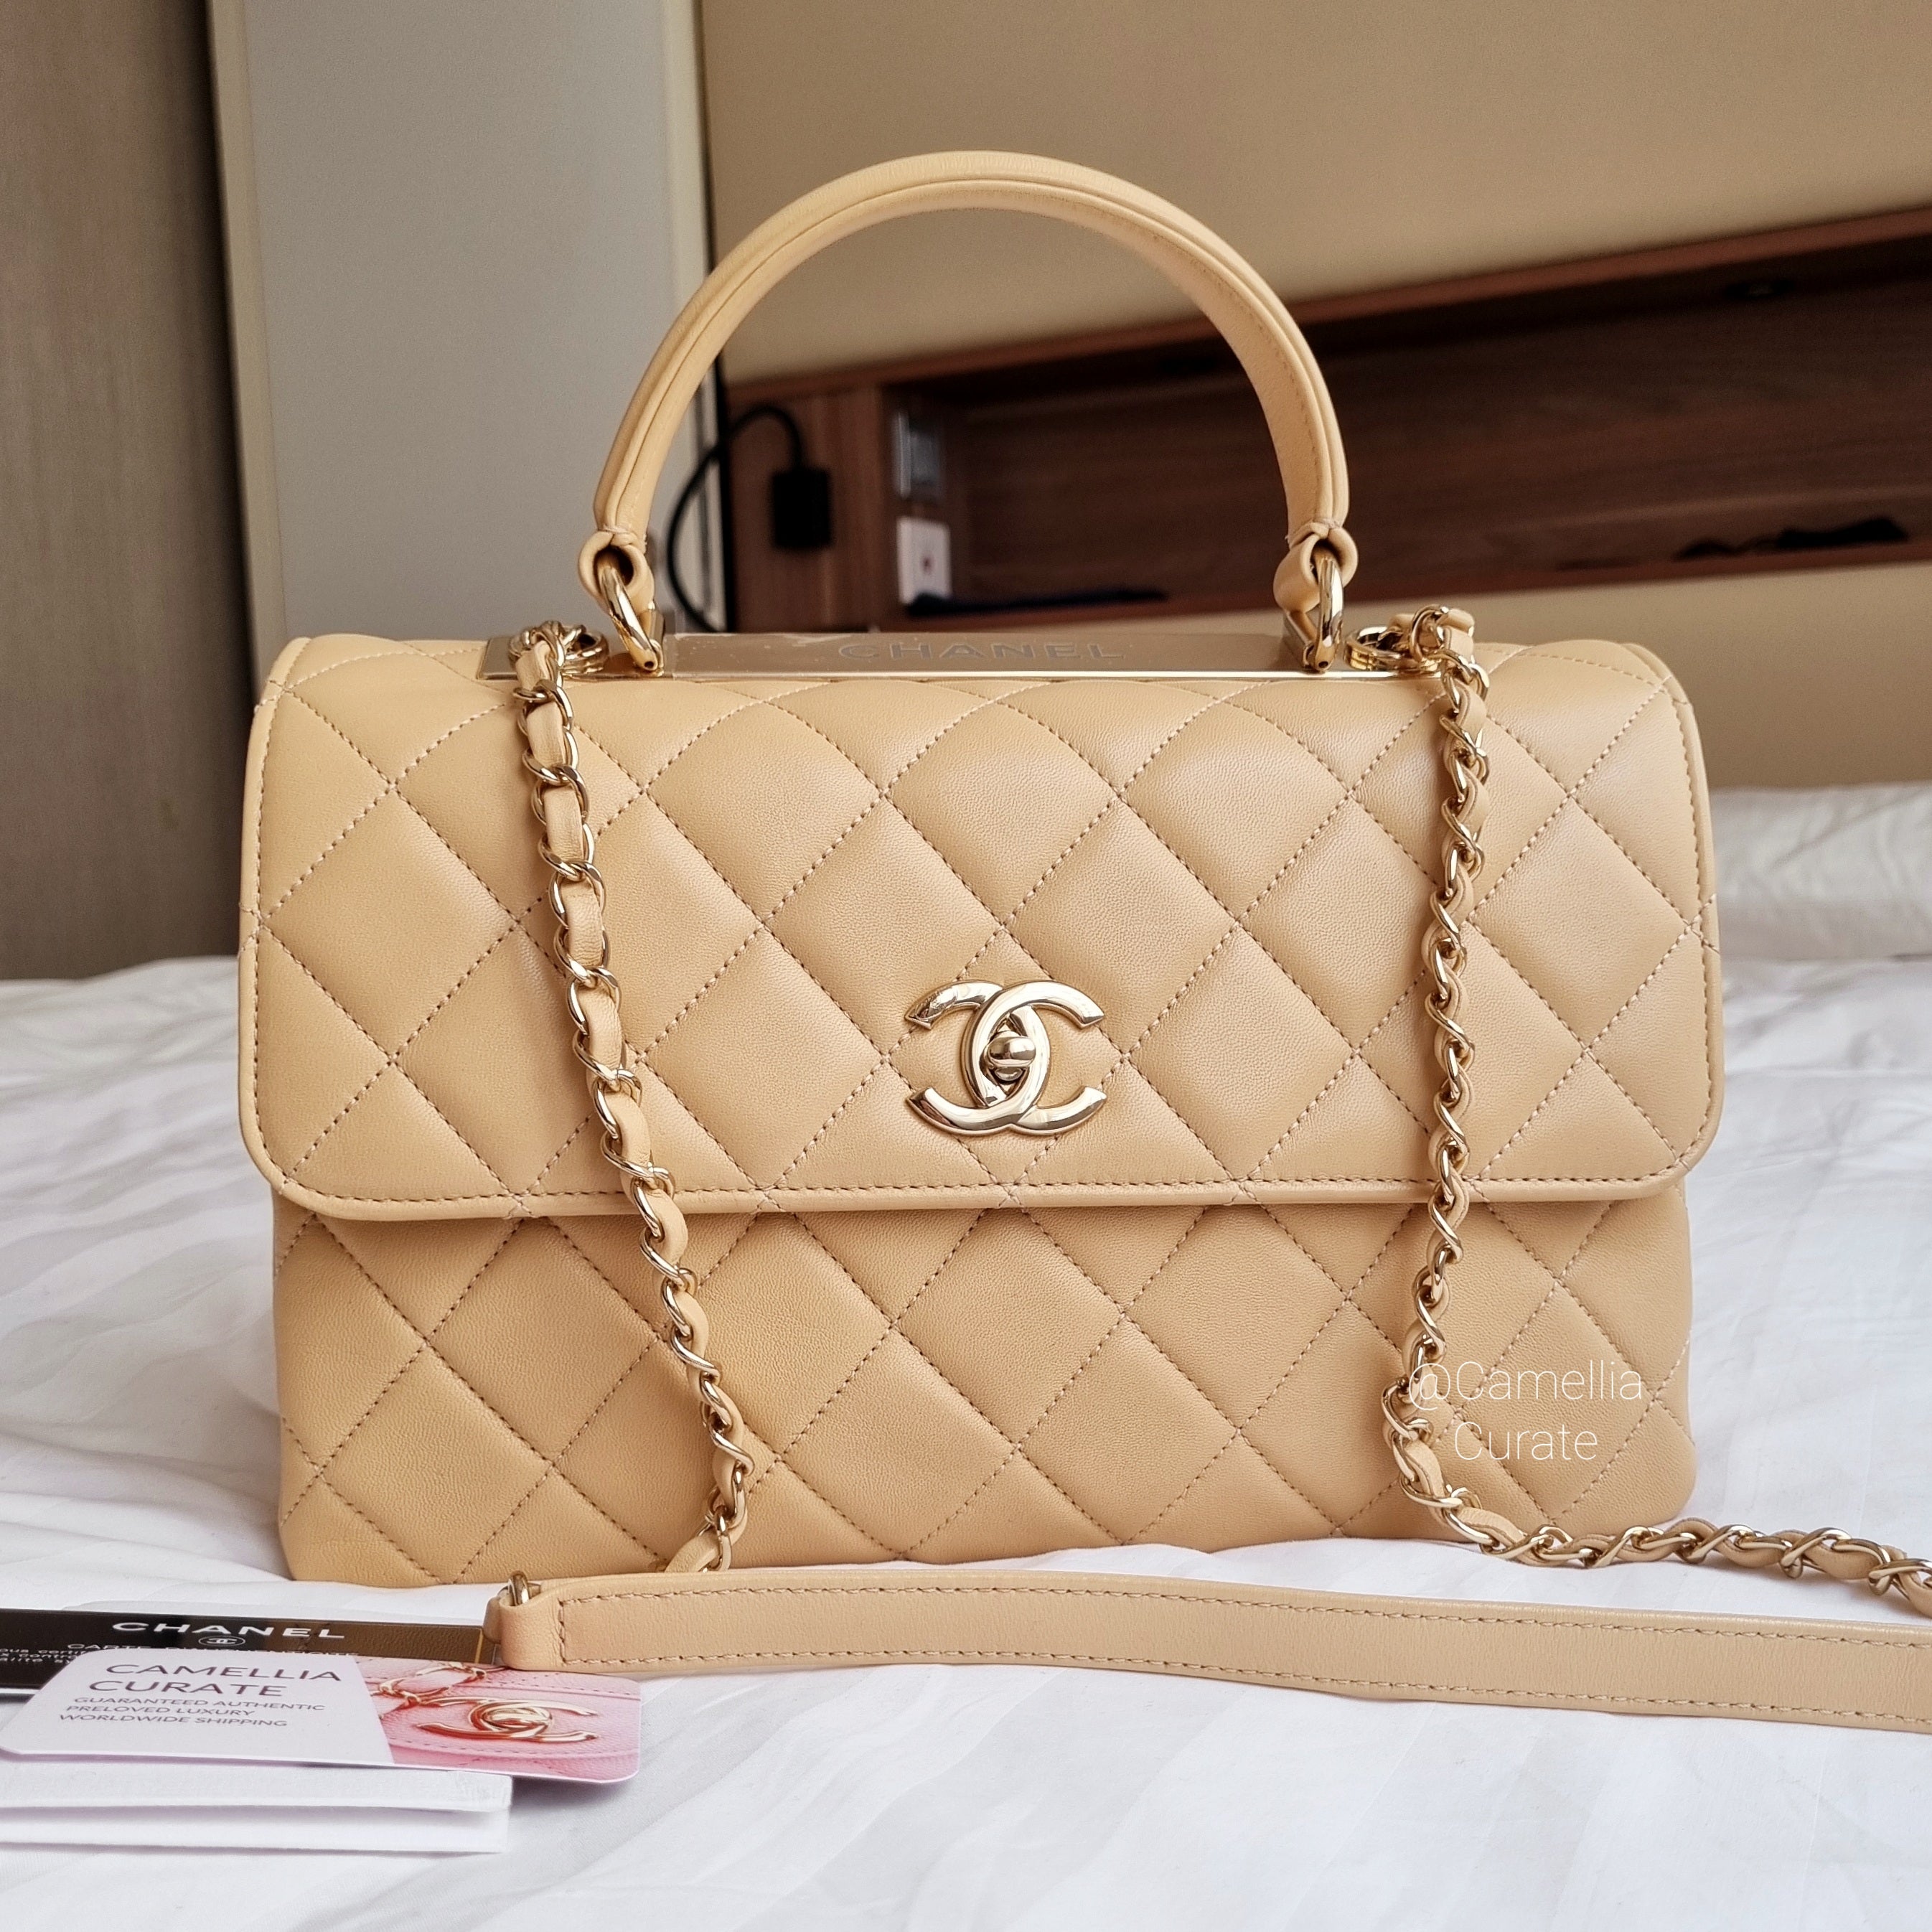 Finally adding my dream Chanel bag to the collection 🤍